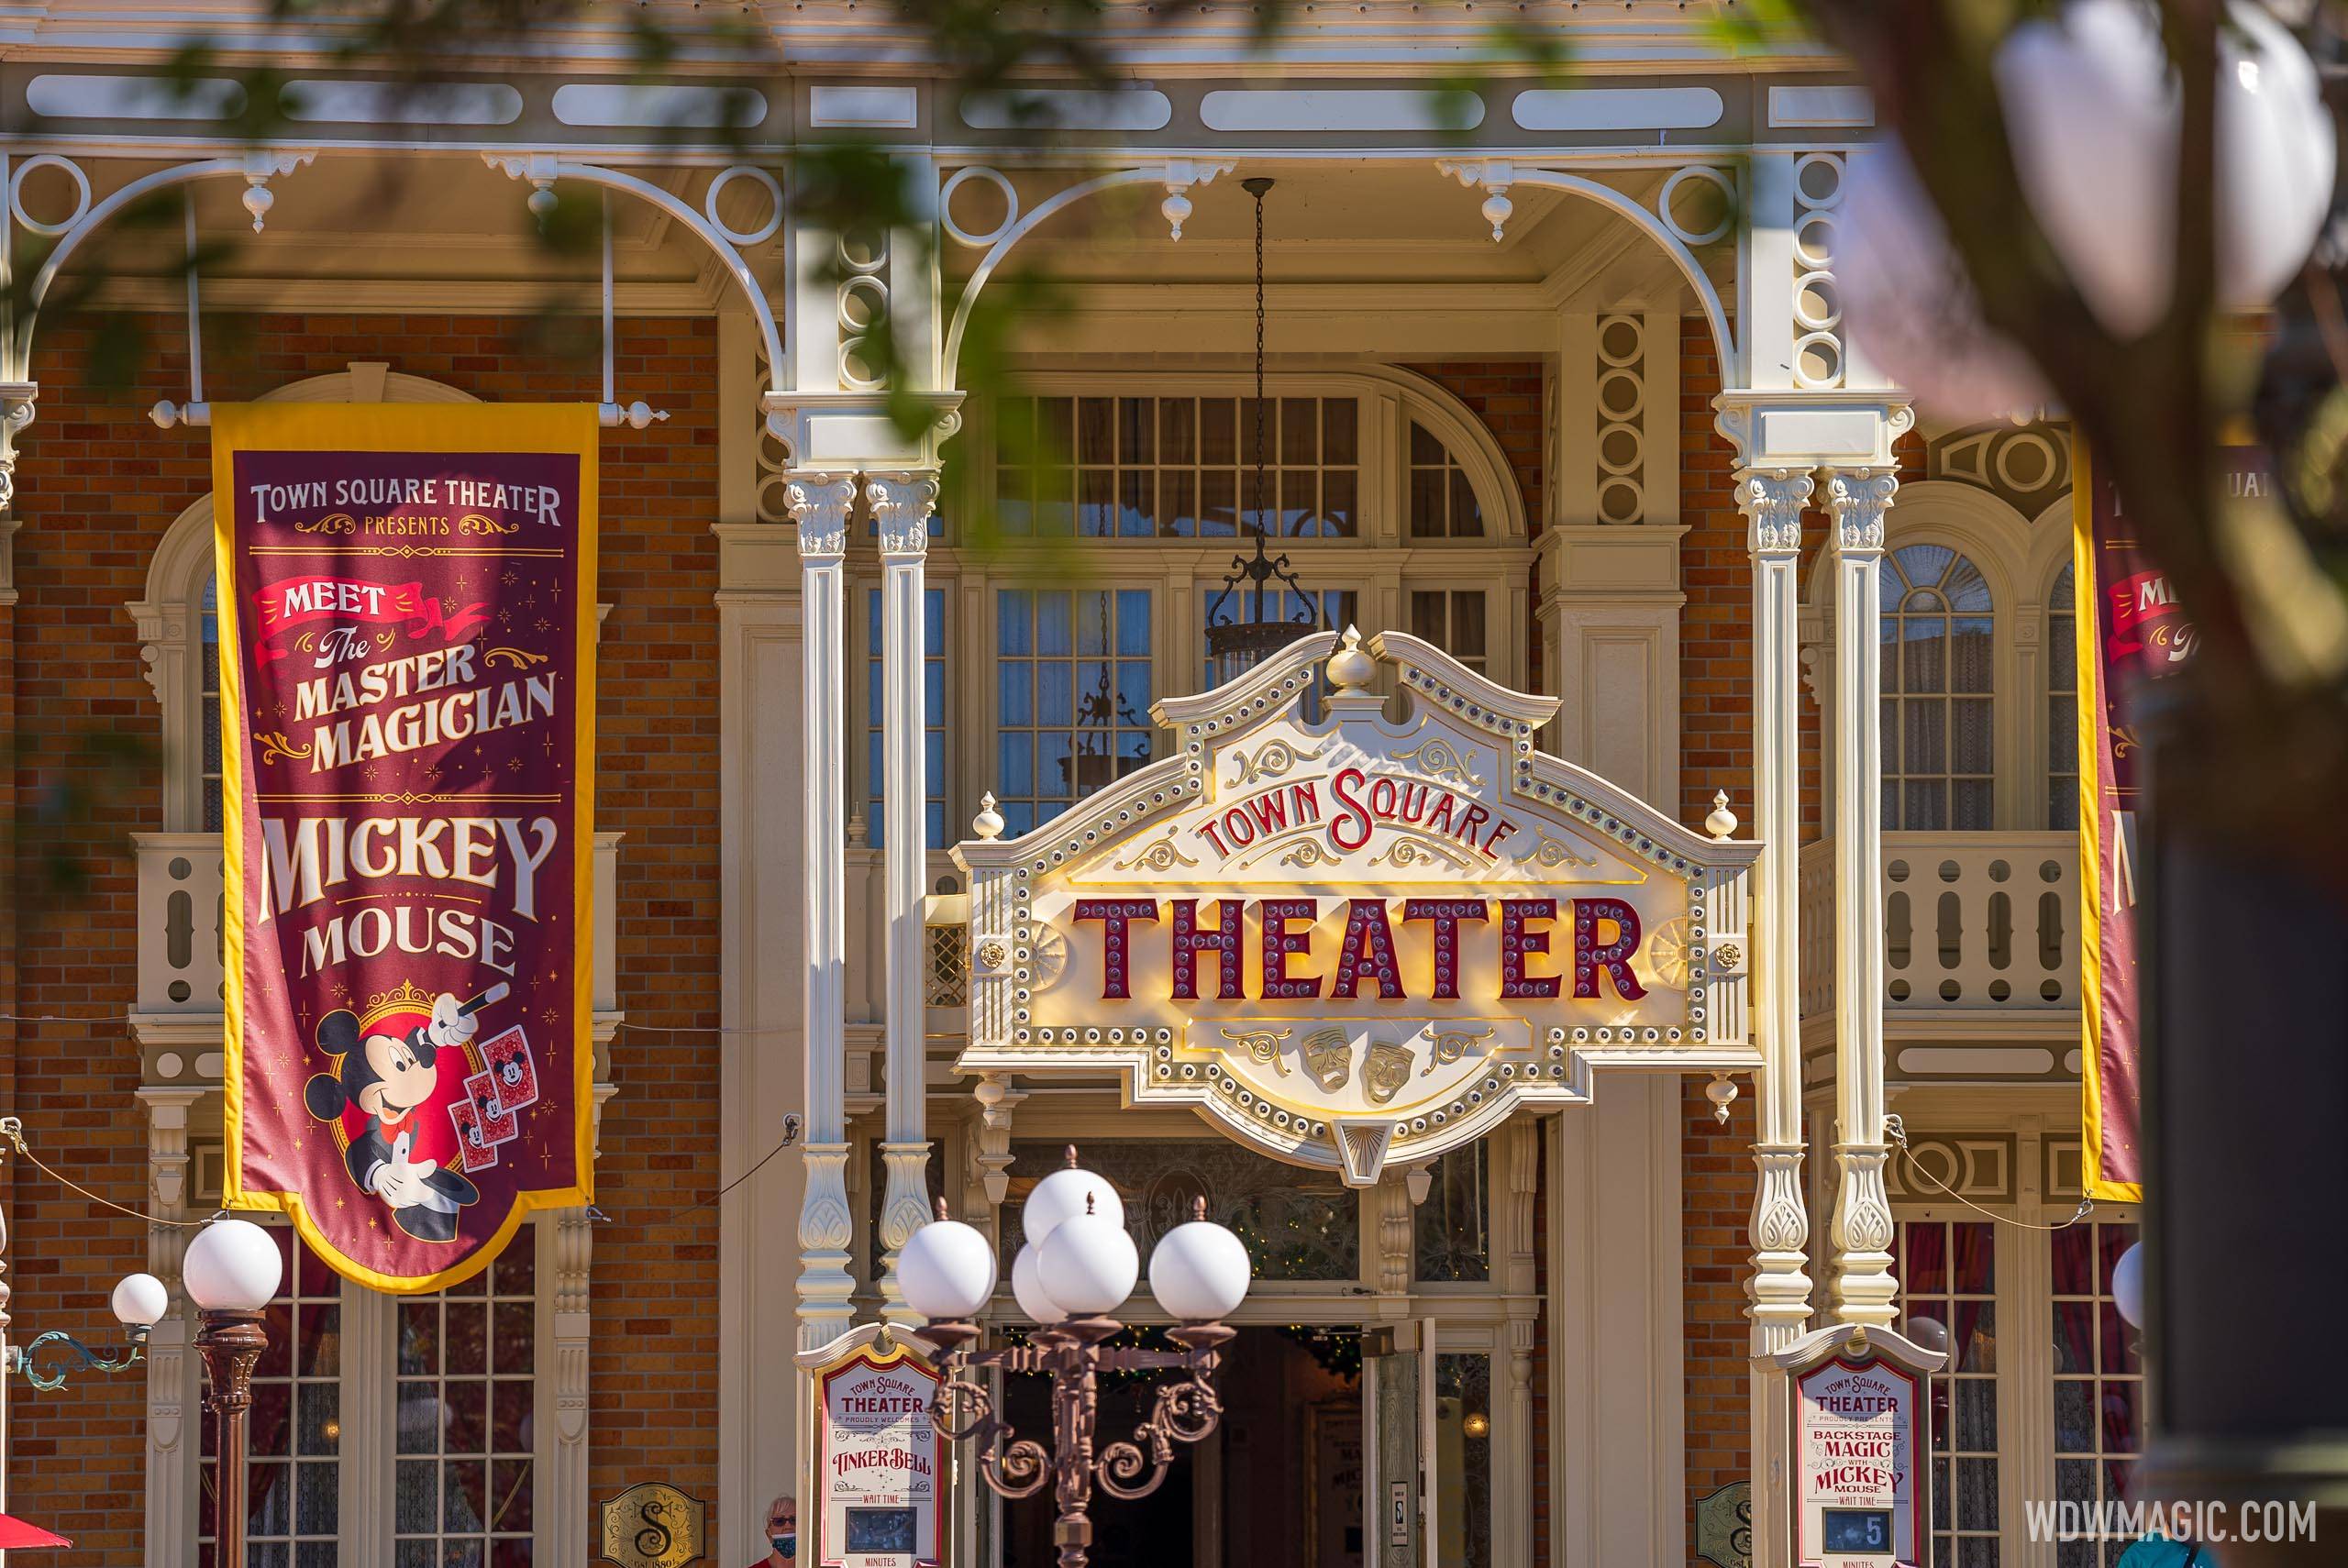 Date set for Tinker Bell meet and greet move to Town Square Theater